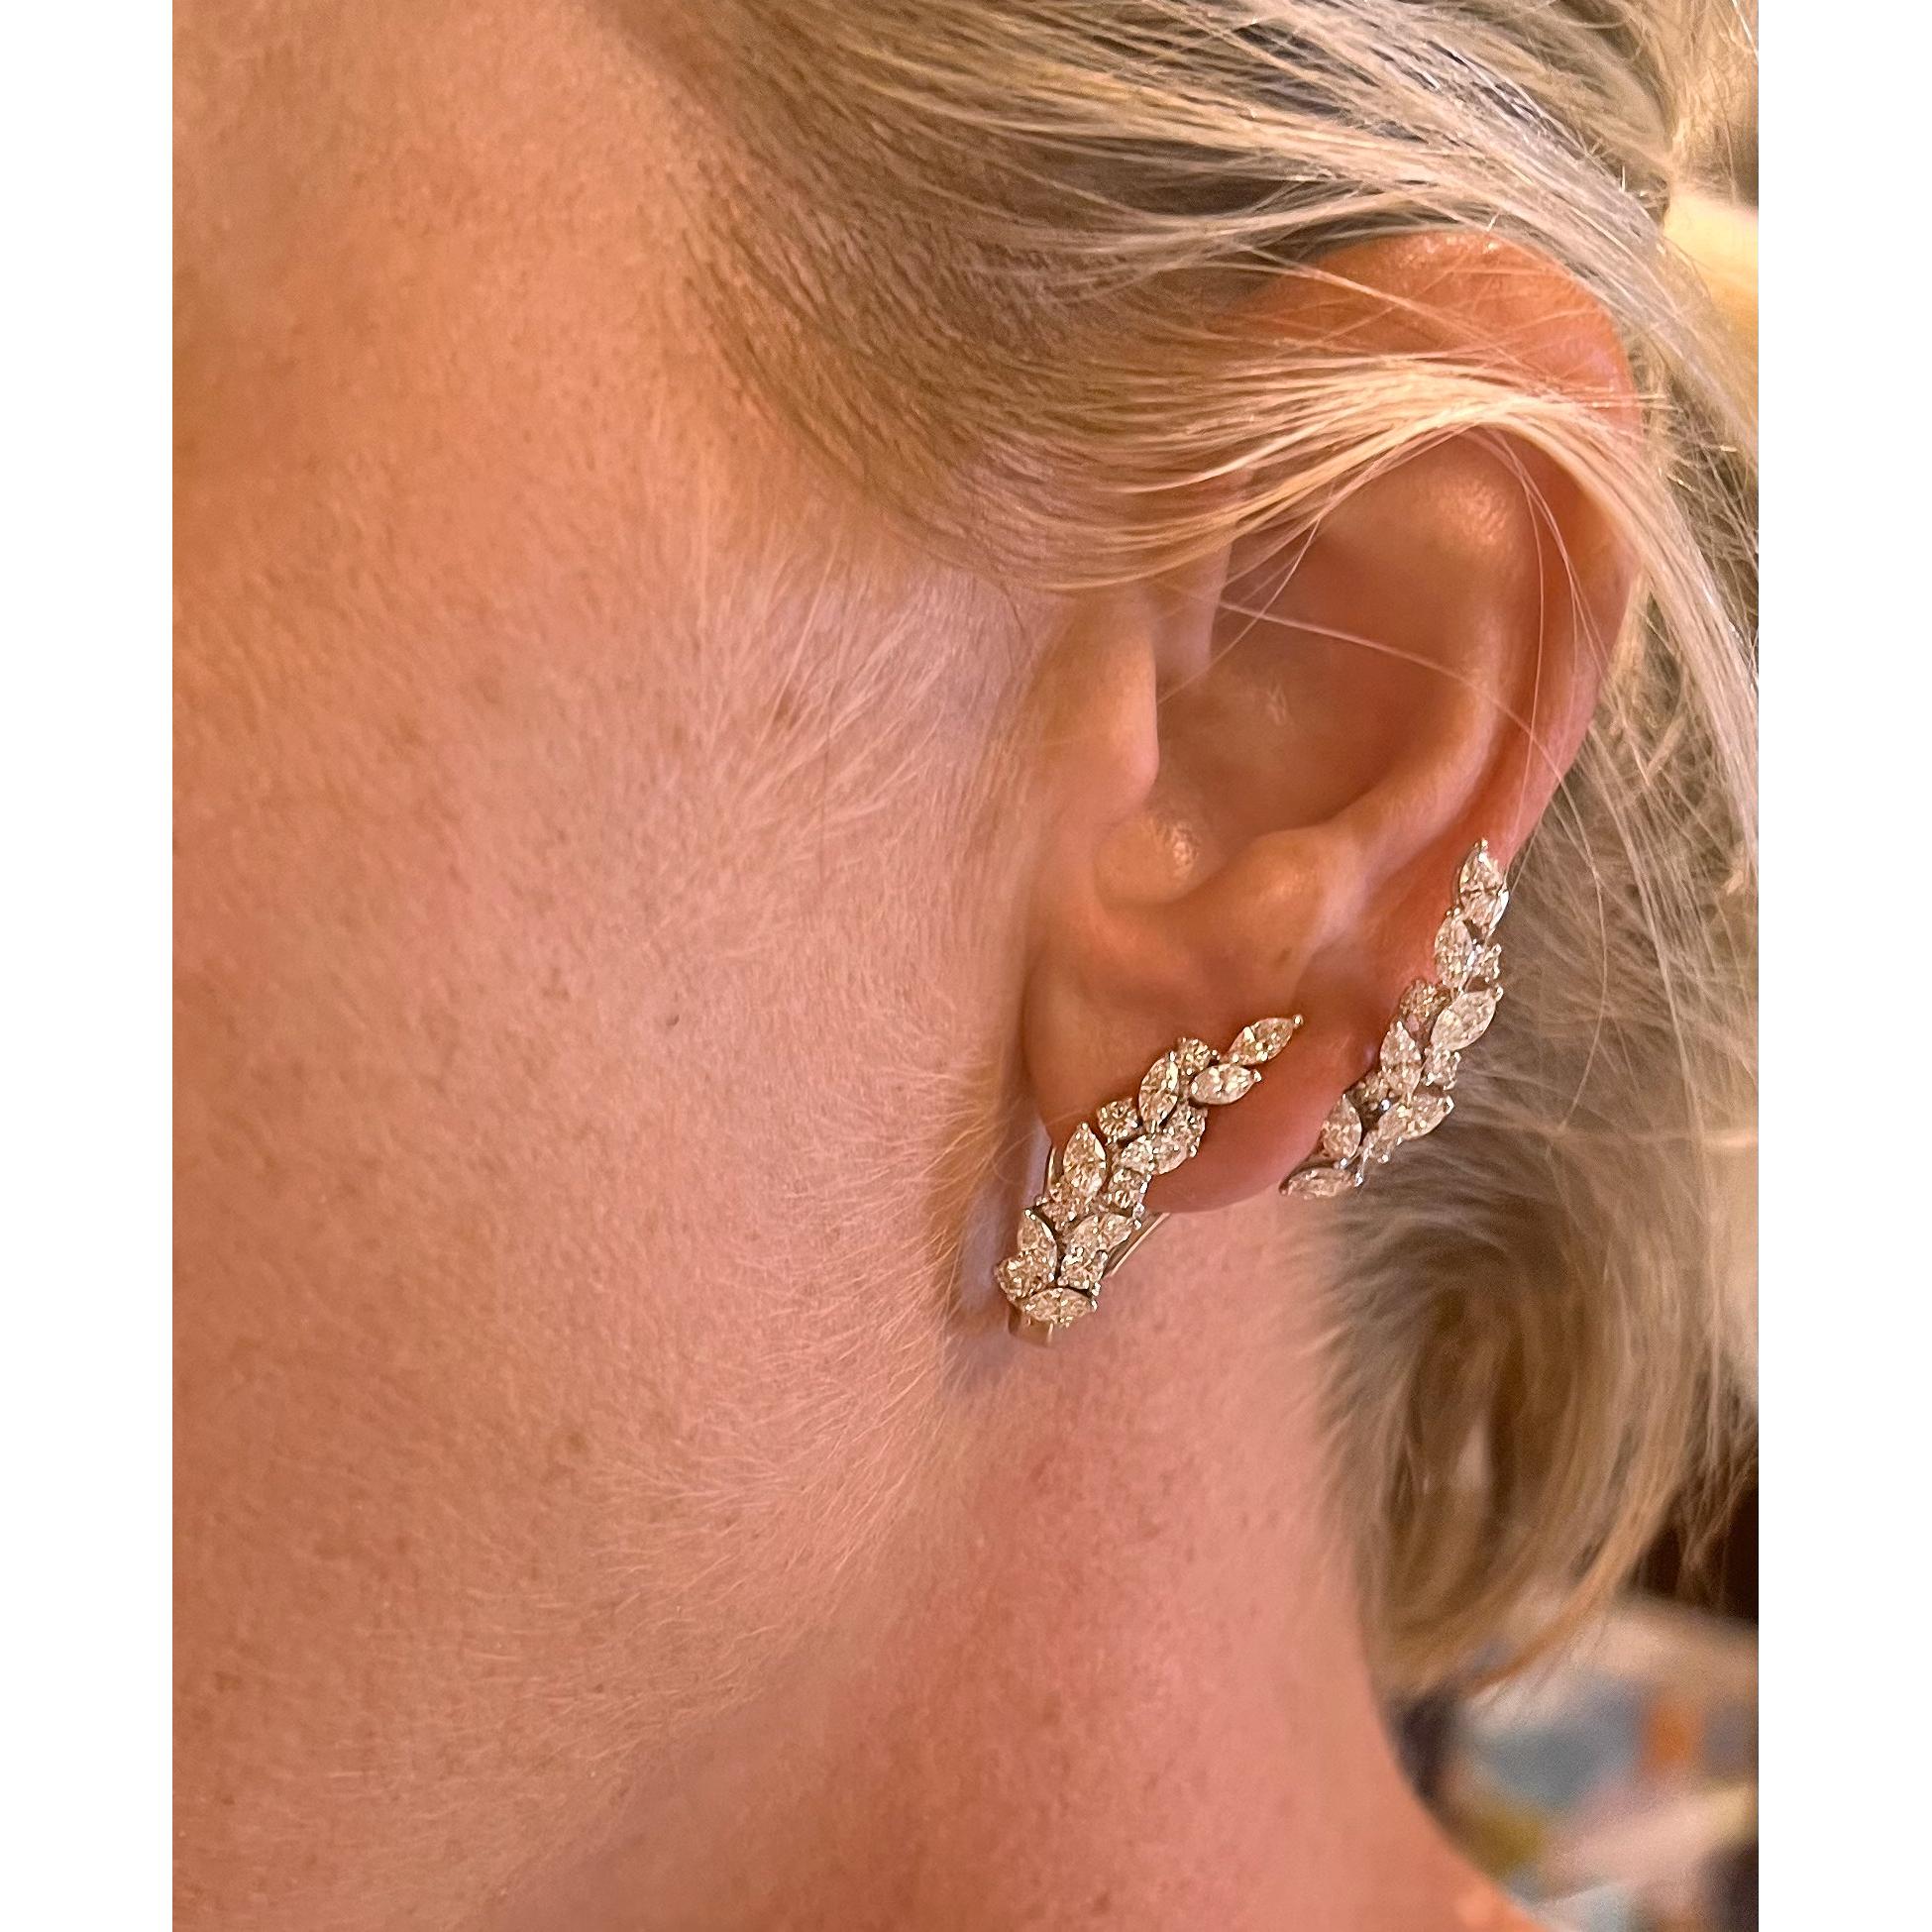 18kt white gold and diamond ear climbers, showcasing thirty marquise-shaped diamonds and twenty-two round brilliant-cut diamonds altogether weighing approximately 3.40 total carats.  Hinged with a pad that allows for the climber to fit comfortably